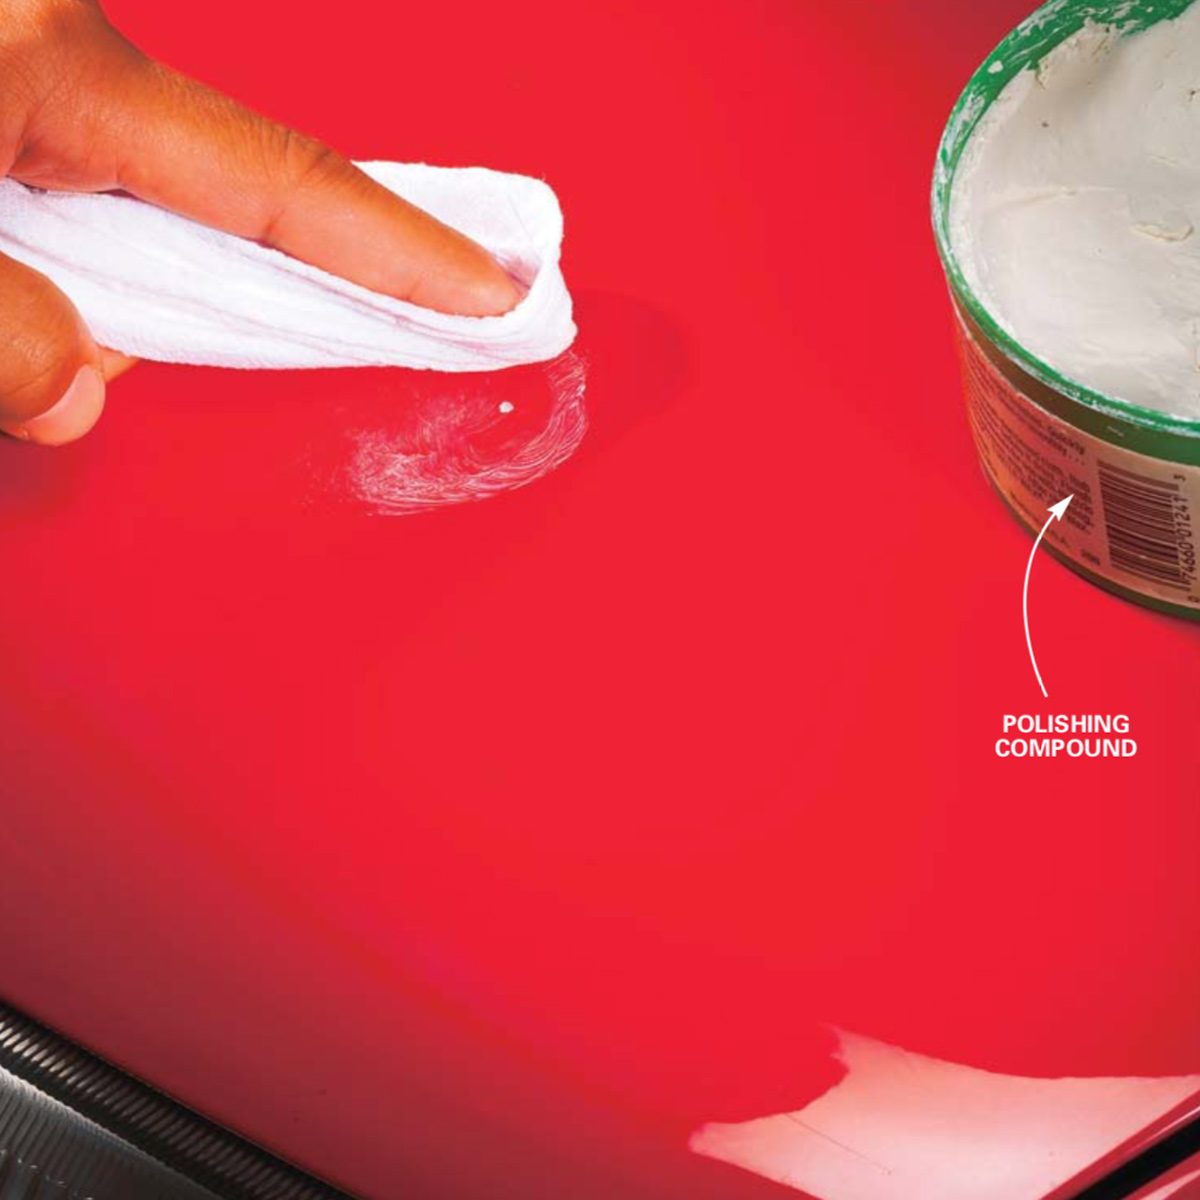 How to Repair Chipped Car Paint in 4 Simple Steps